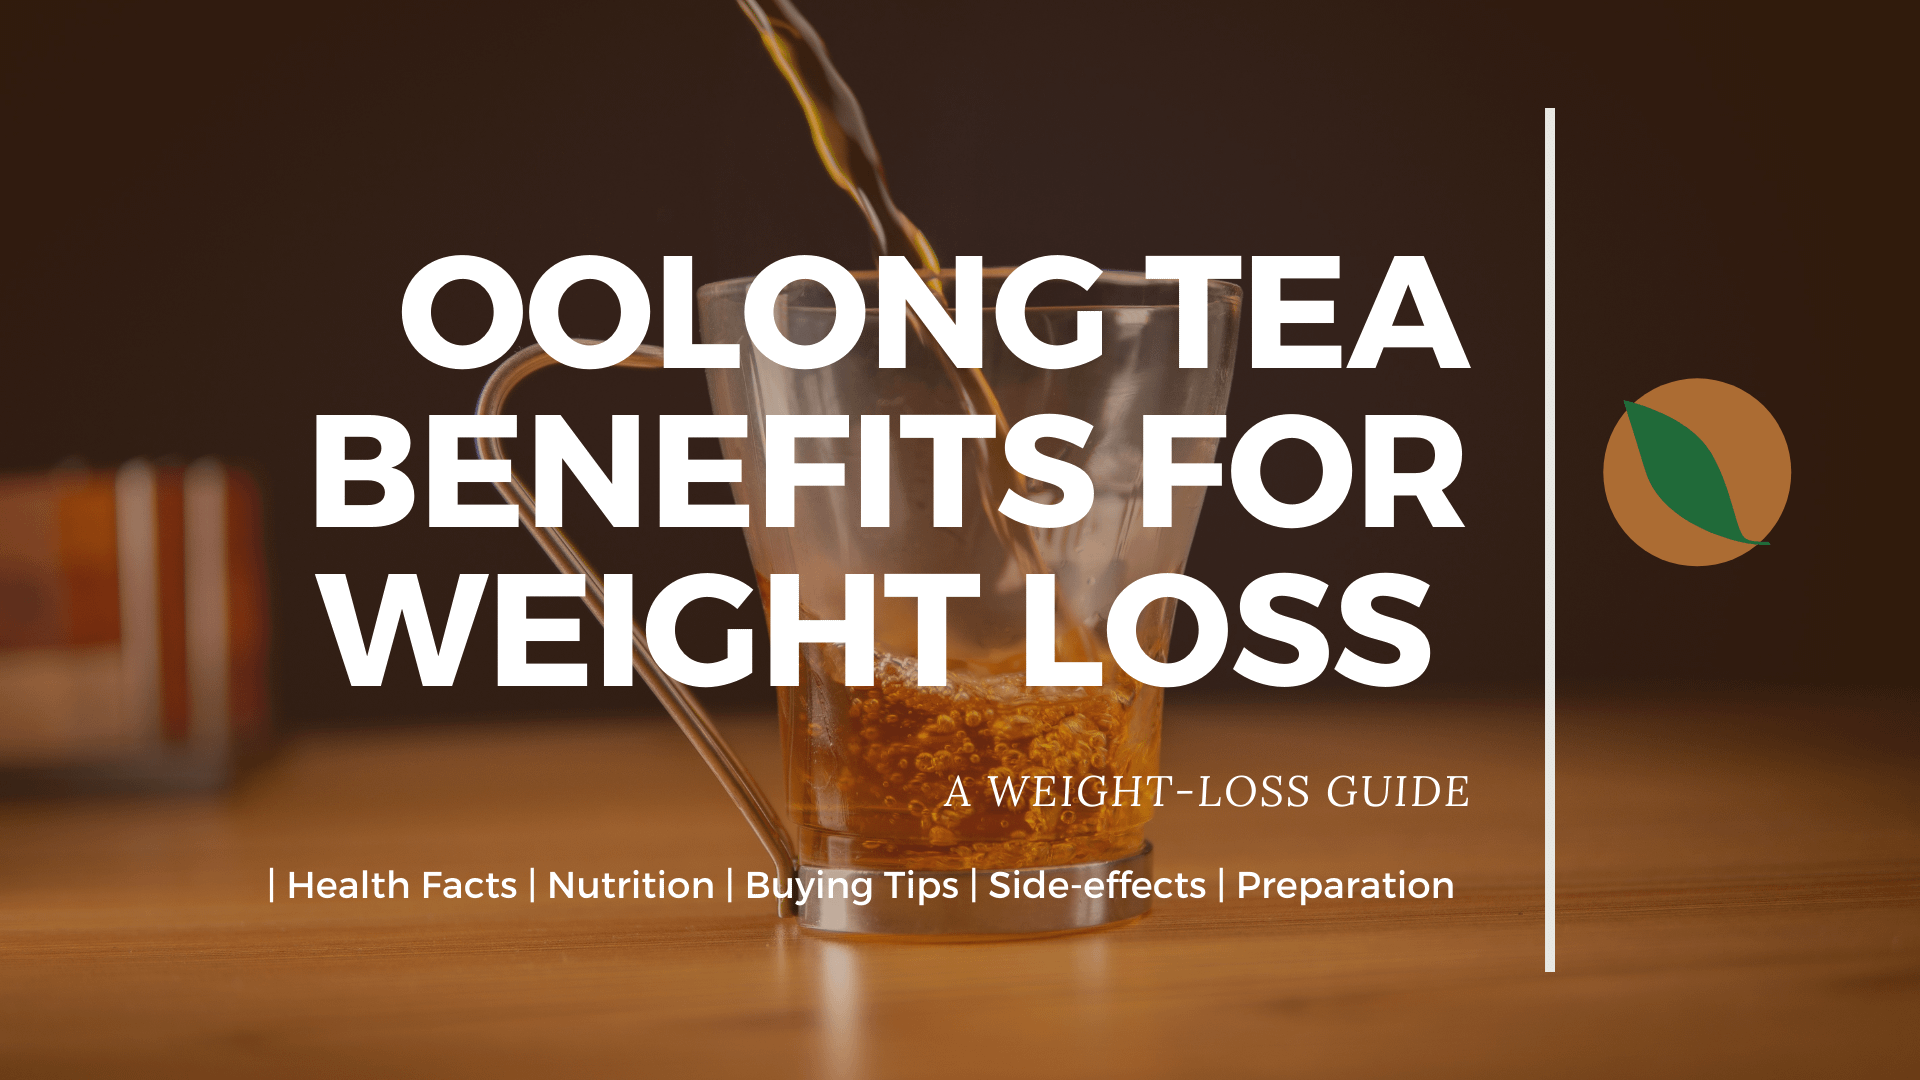 Weight loss: Drink two cups of oolong tea a day to lose weight in